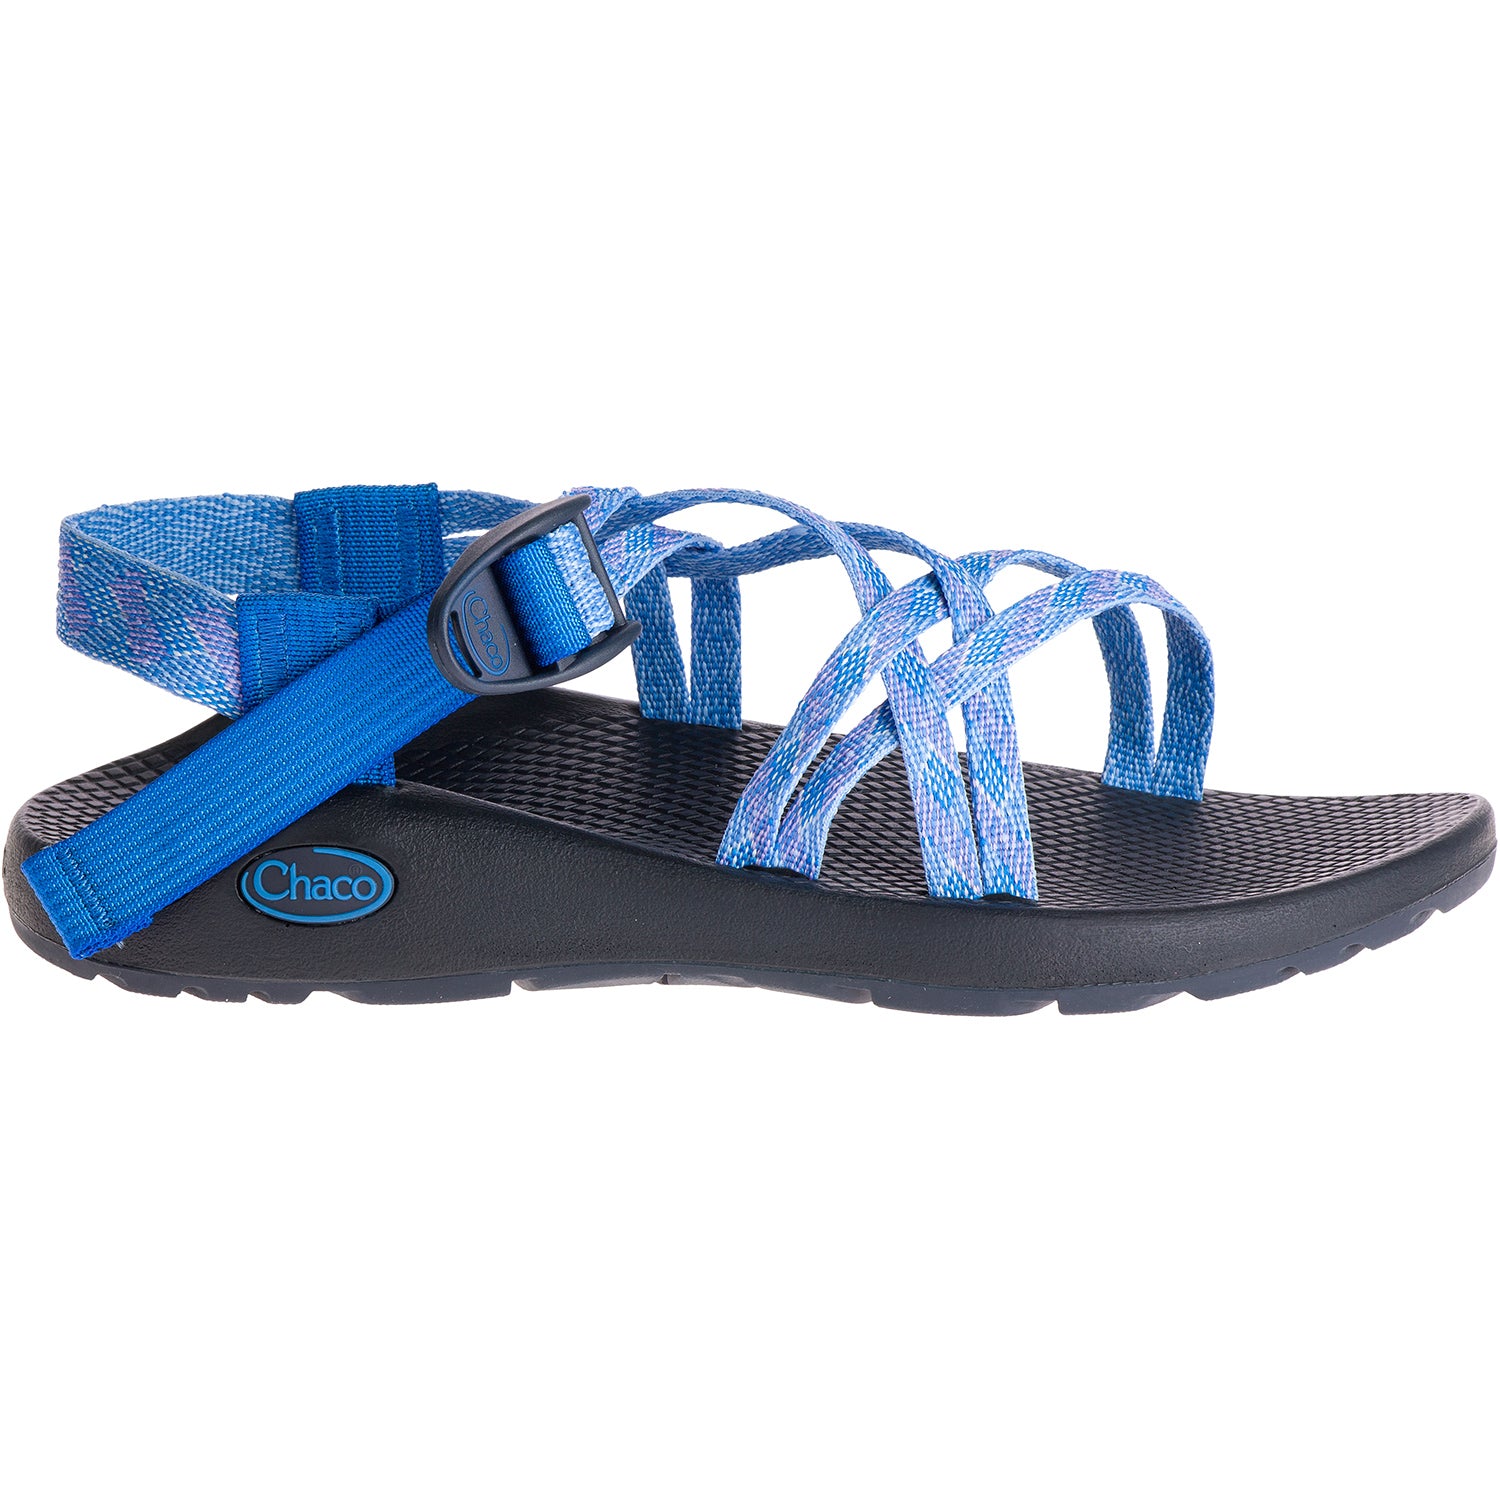 Chaco Women's ZX/1 Classic Wide Sandals